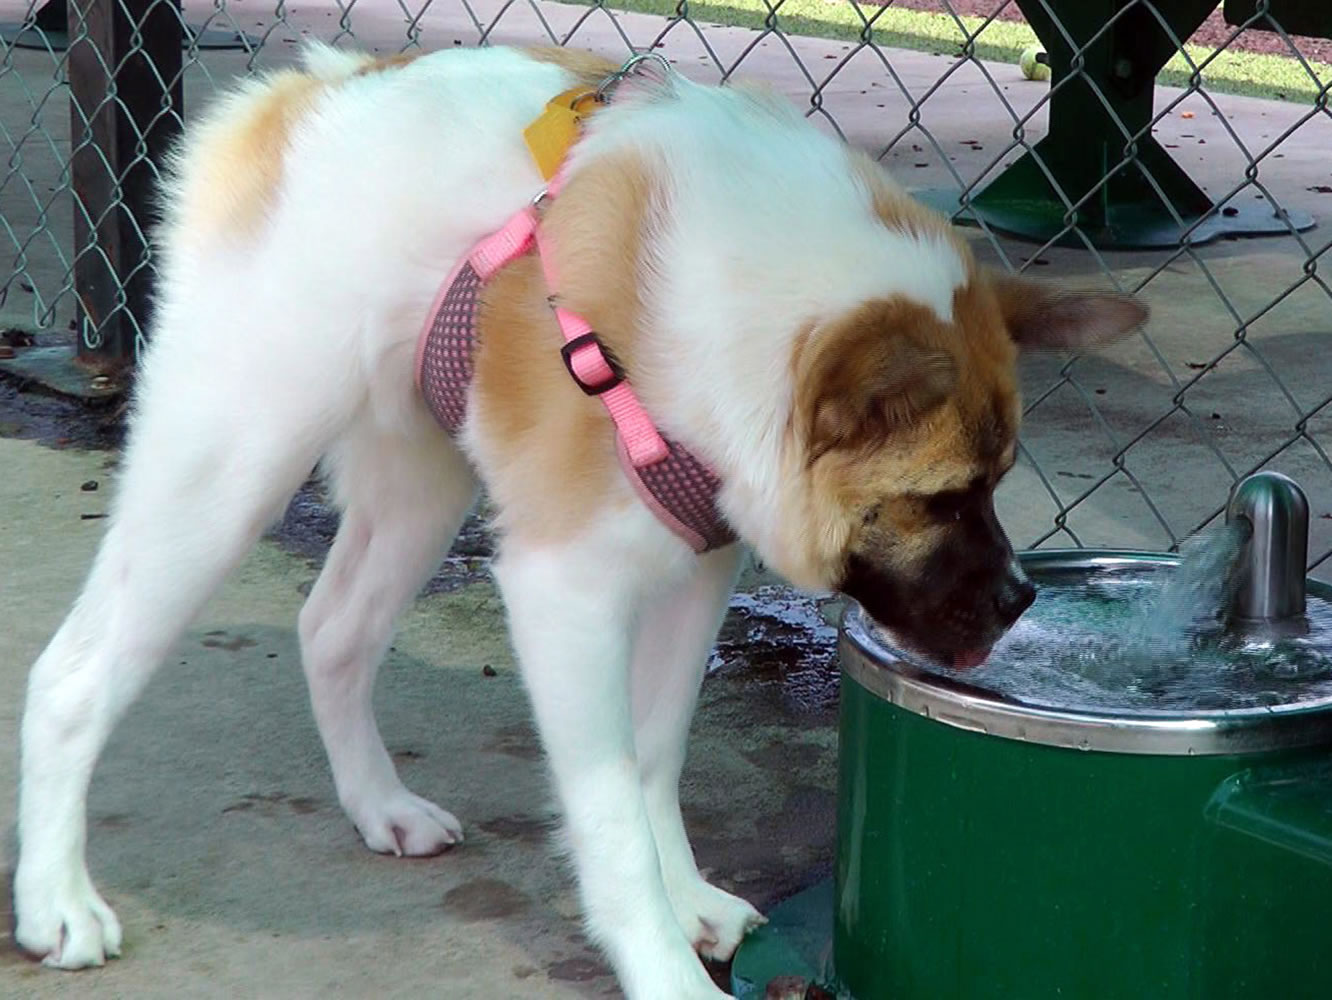 Kim Dillenbecku2019s dog Pig drink water at a park in Alabaster, Ala., on June 17. Born in Atlanta with severe deformities and adopted by the Dillenbeck as a puppy, the mixed-breed dog has gangly legs, a body that appears to have been cut in two and no neck. She hops like a frog to stand up and walks with a high-shouldered gait that resembles a gorilla.